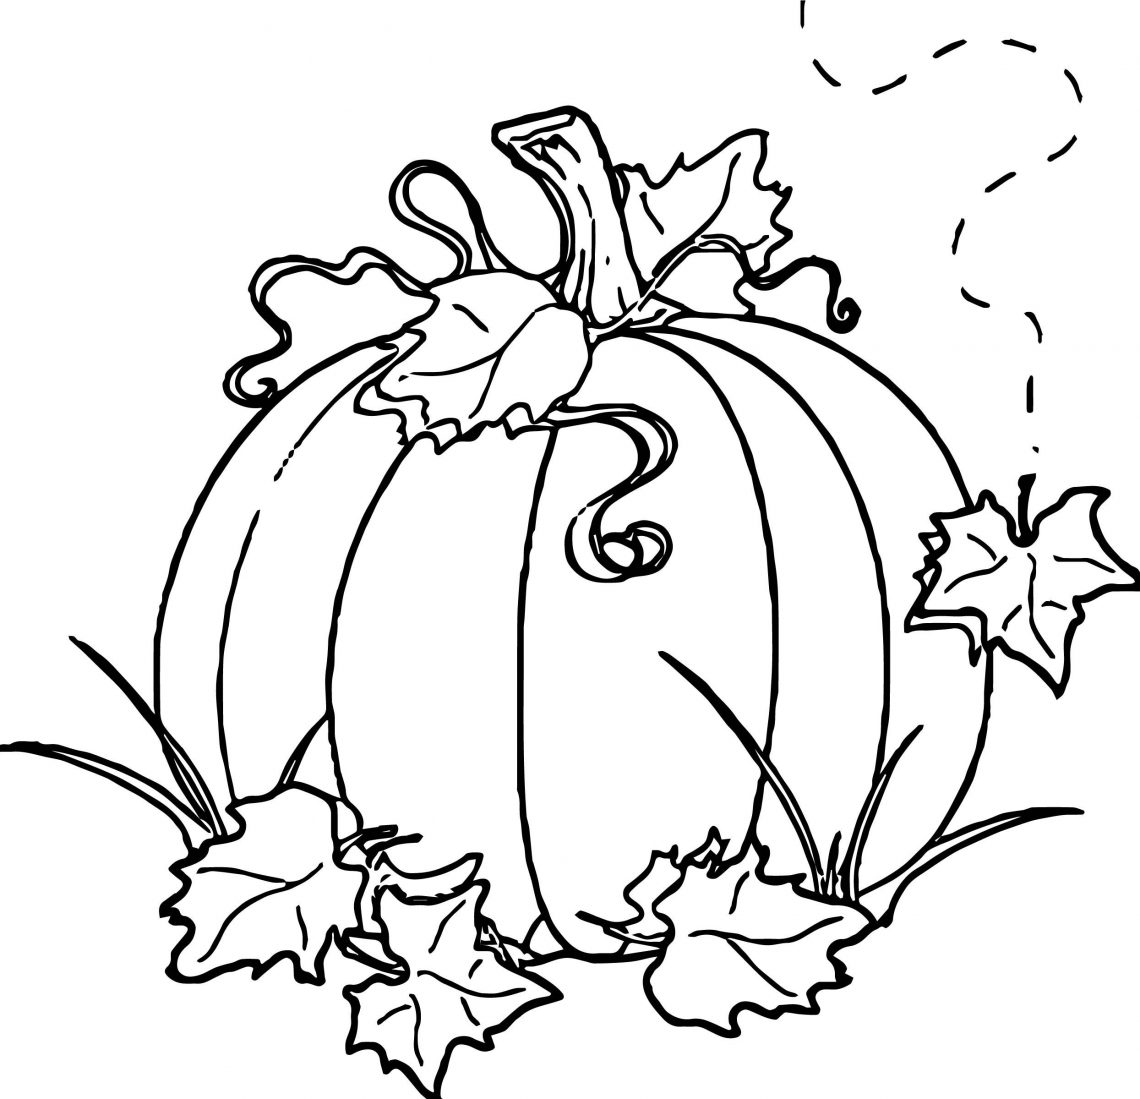 Easy Pumpkin Coloring Pages For Kids - Visual Arts Ideas